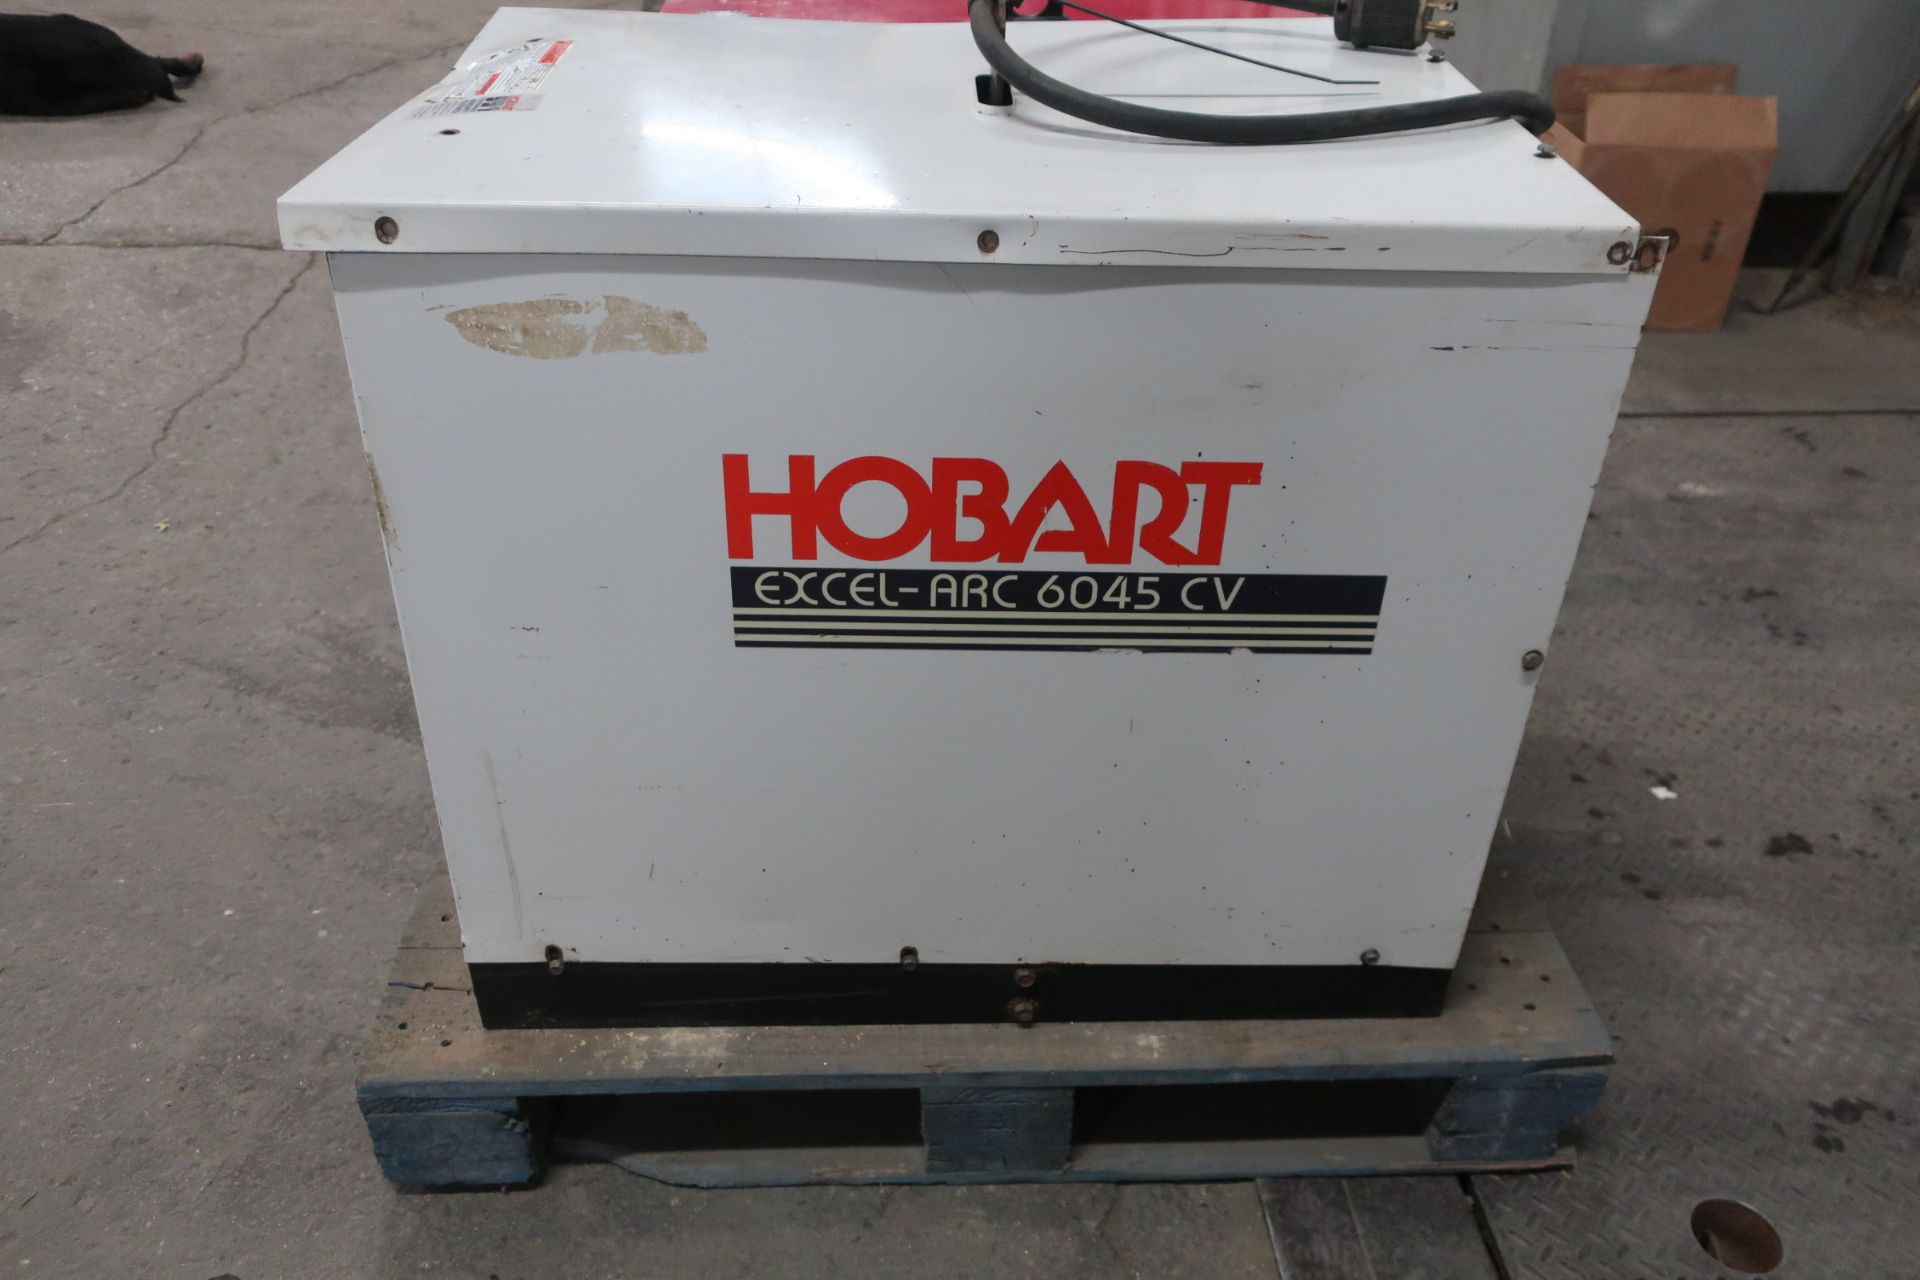 Hobart Thermal Arc Excel-Arc 6045 CV Mig Welding Power Source 450A unit - Image 2 of 2